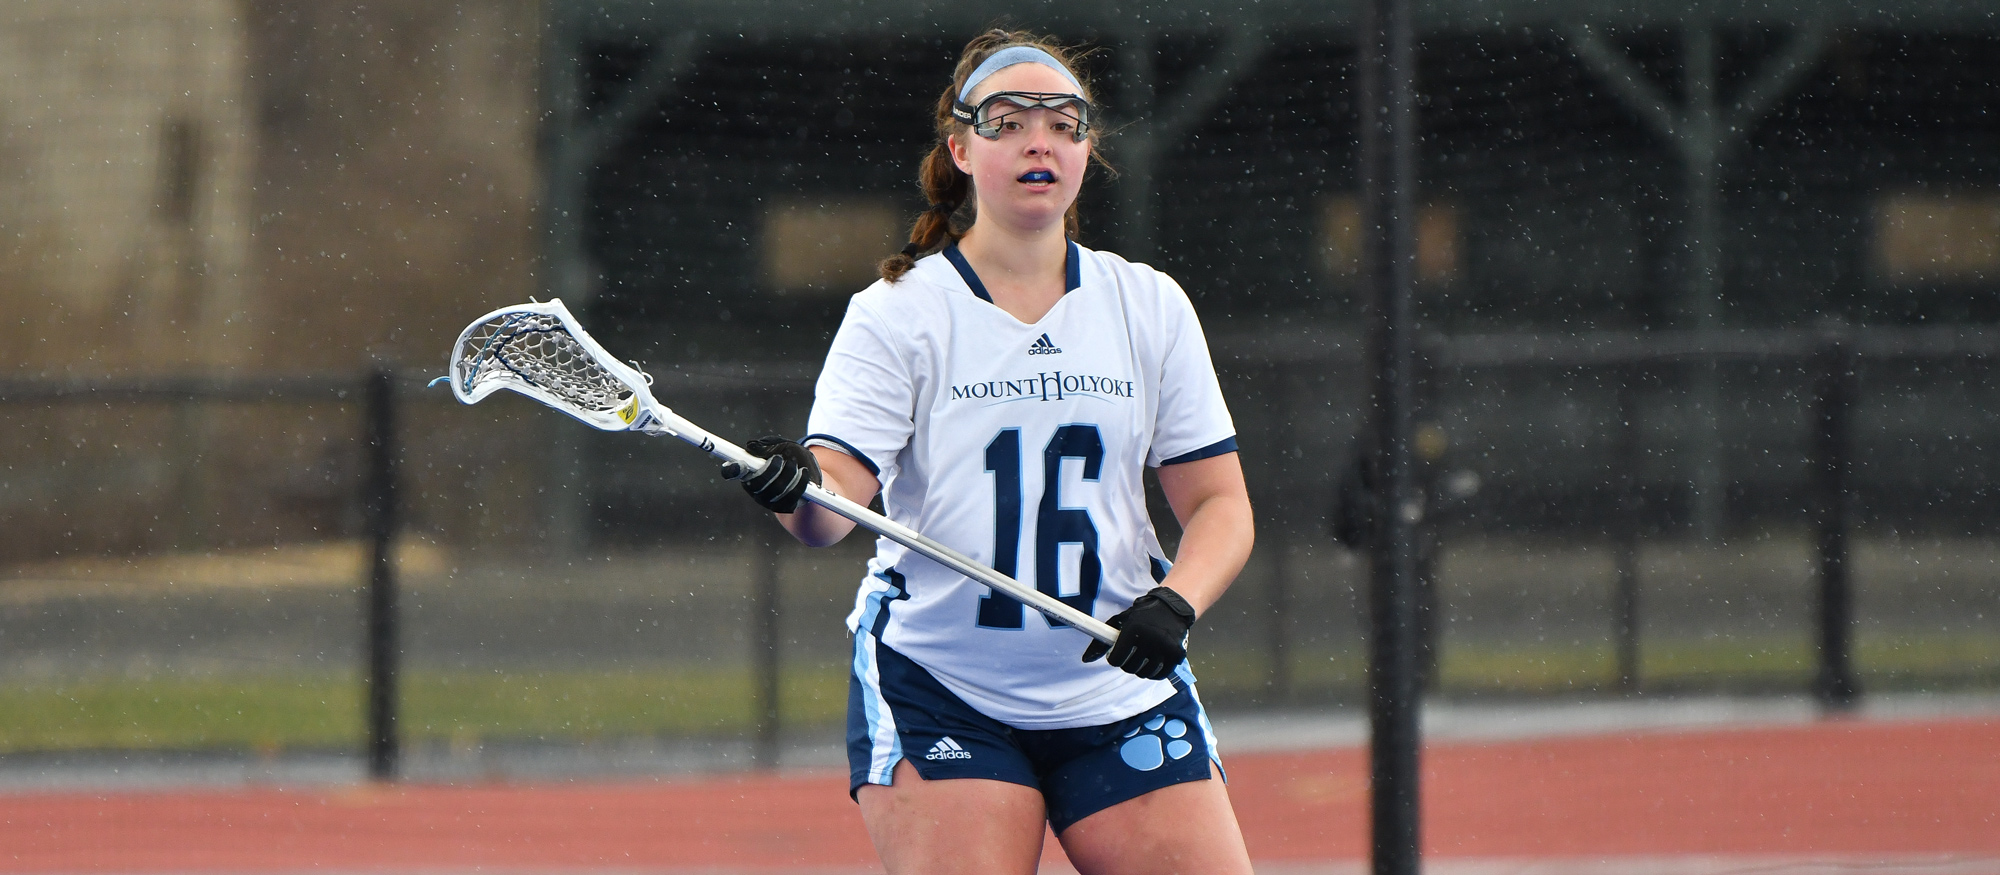 Madison Millyan tallied two goals and two assists in Mount Holyoke's 12-5 victory over Thomas College on March 2, 2023. (RJB Sports file photo)